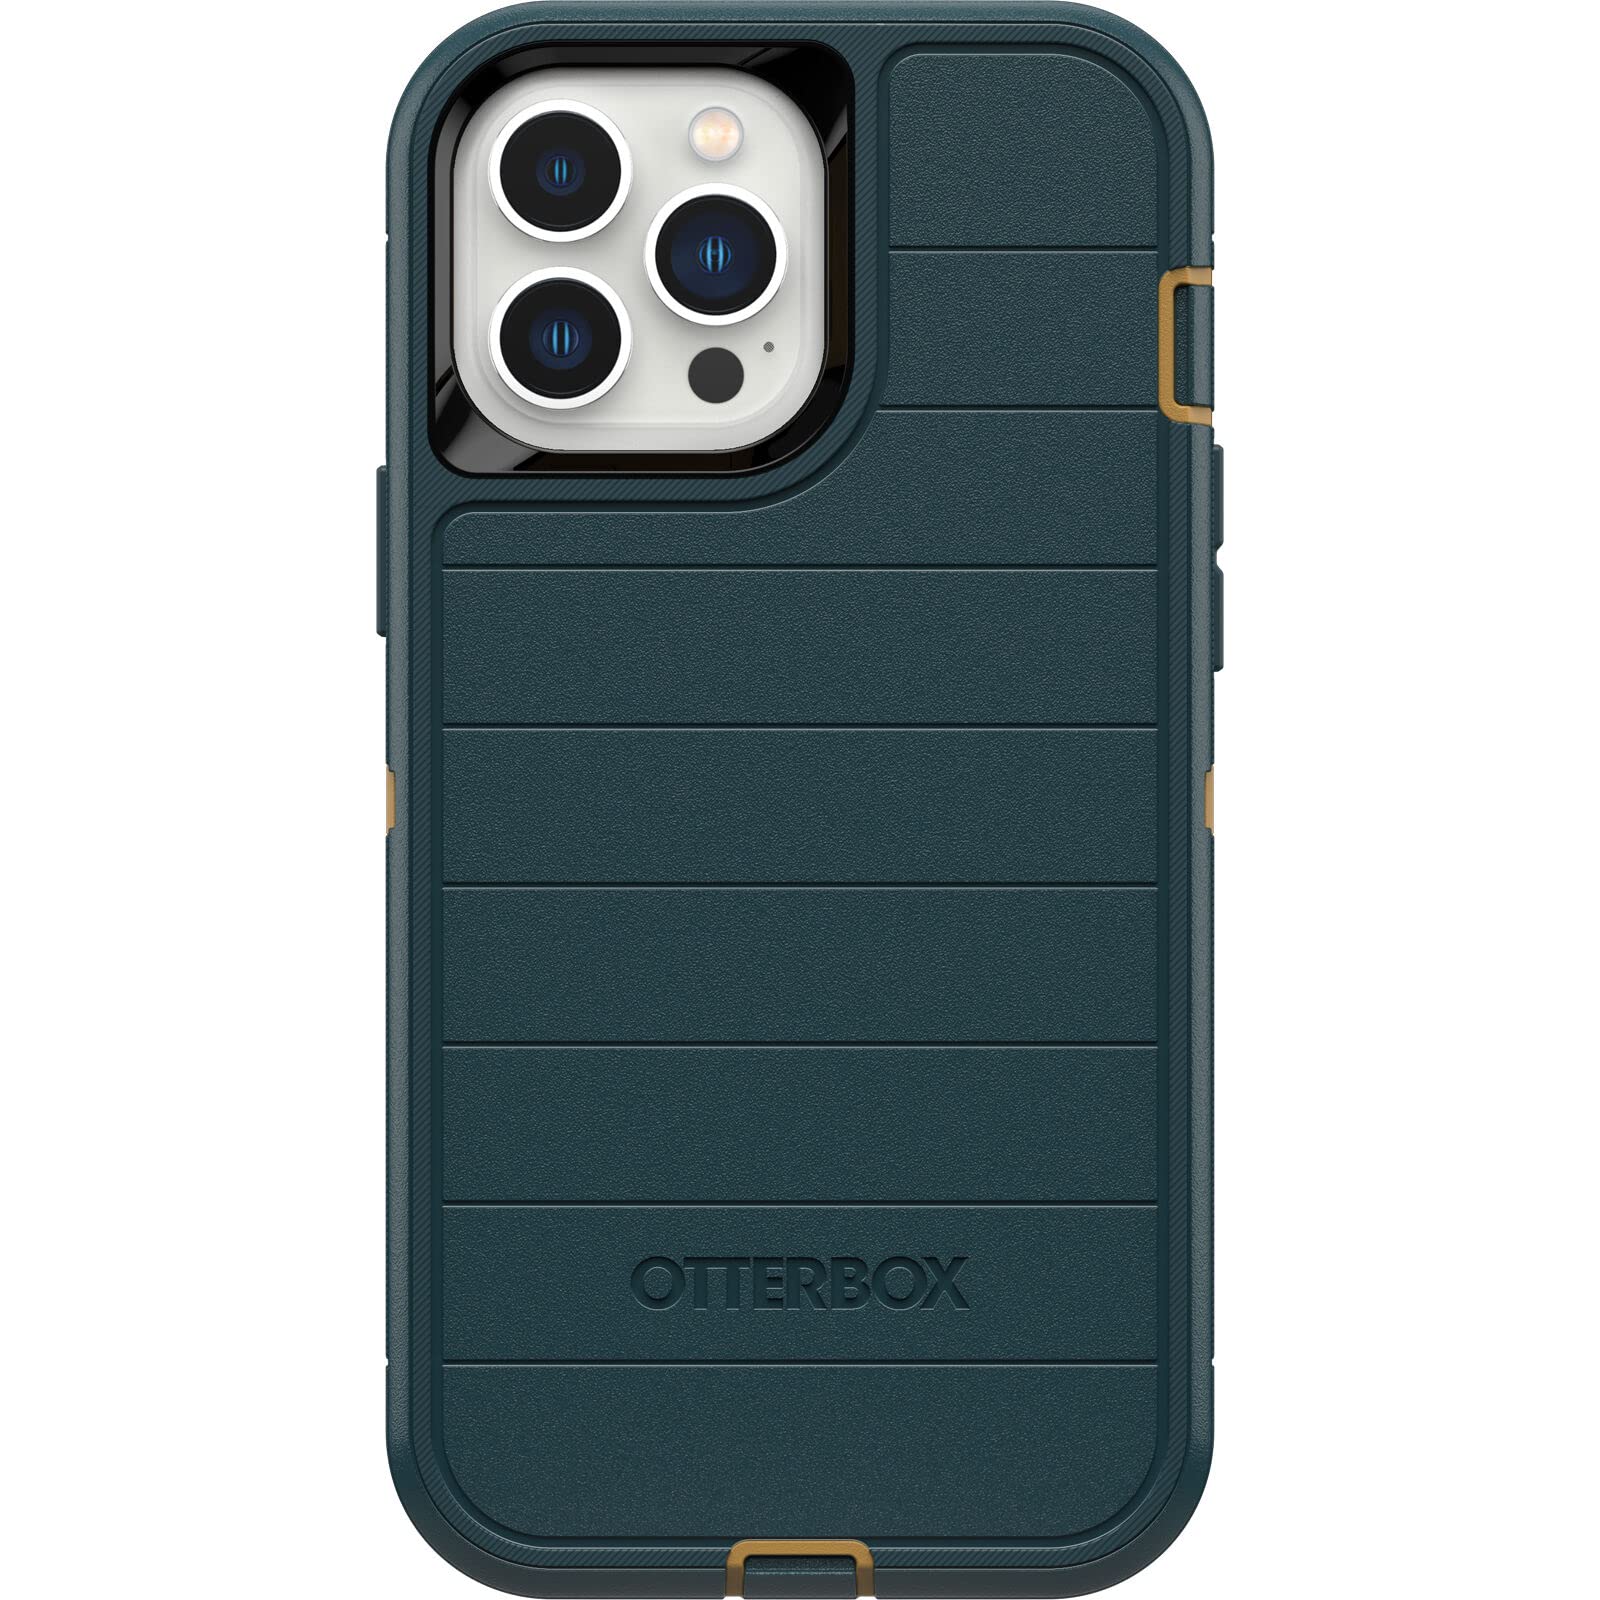 OtterBox Defender Series Screenless Edition Case for iPhone 13 Pro Max & iPhone 12 Pro Max (Only) - Case Only - Microbial Defense Protection - Non-Retail Packaging - Hunter Green